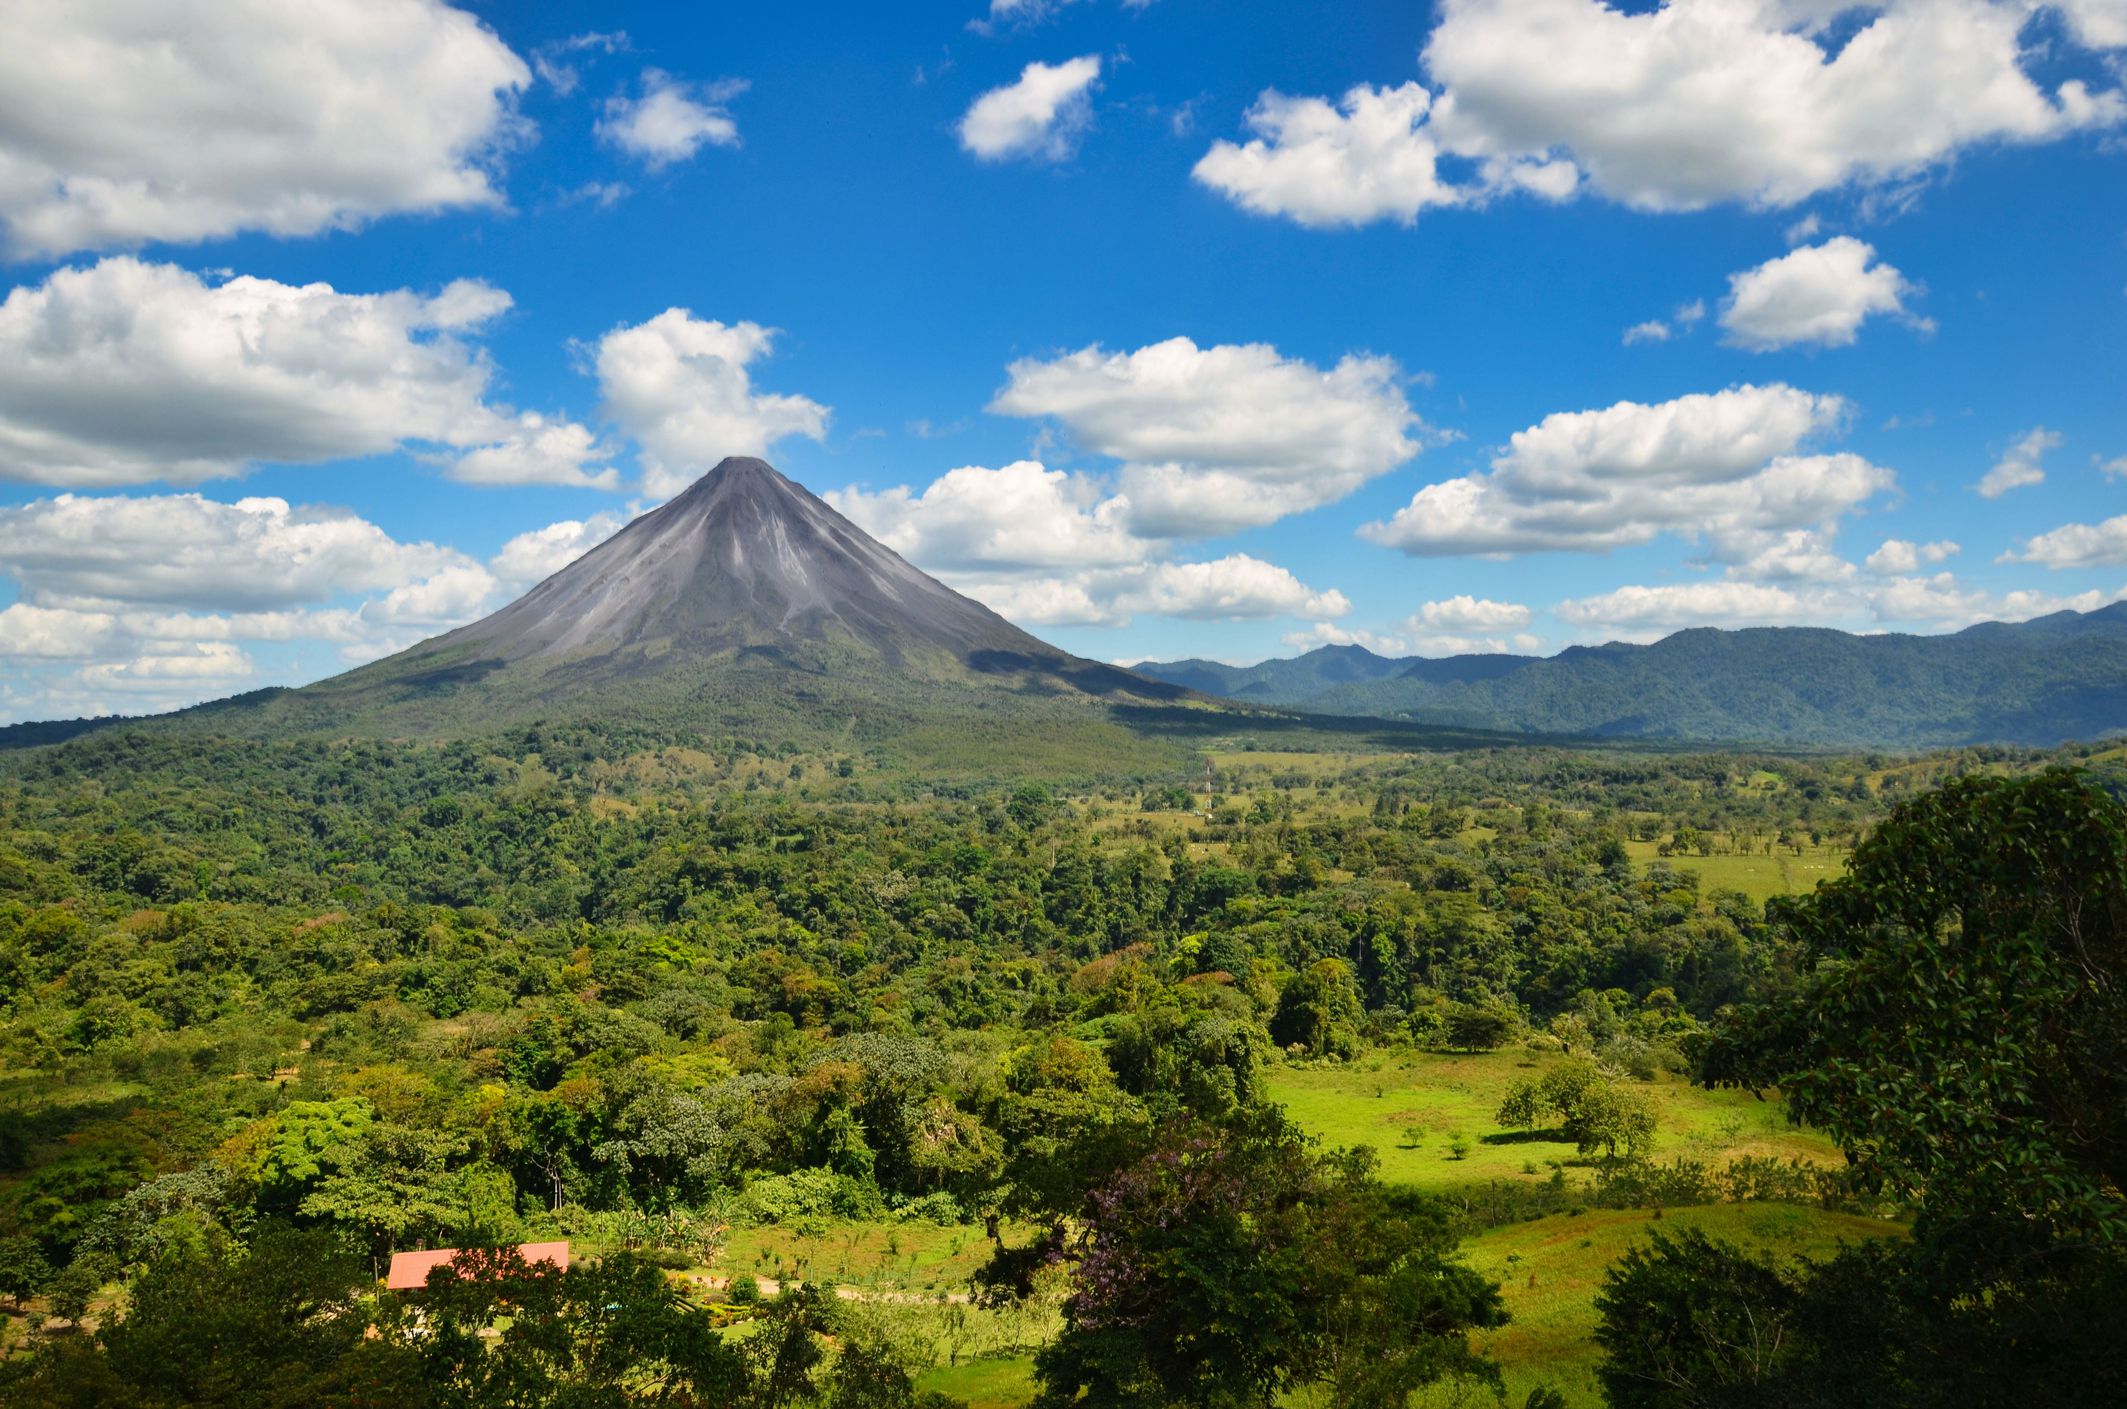 <p><b>Costa Rica<br>Elevation:</b> 5,436 feet<br>The Arenal Volcano in Costa Rica is one of the most visited tourist attractions in Central America. You can visit and hike through <a href="https://www.nationalgeographic.com/travel/article/stromboli-volcano-island-tourism-sicily">the national park,</a> which is an hour's drive from San Jose, or you can enjoy an adventure like the 2-hour 4x4 tour through the mountain with a local guide.   </p><p><b>Related: </b><a href="https://blog.cheapism.com/things-to-do-in-central-america/">18 Things You Must Do While Traveling Central America</a></p>